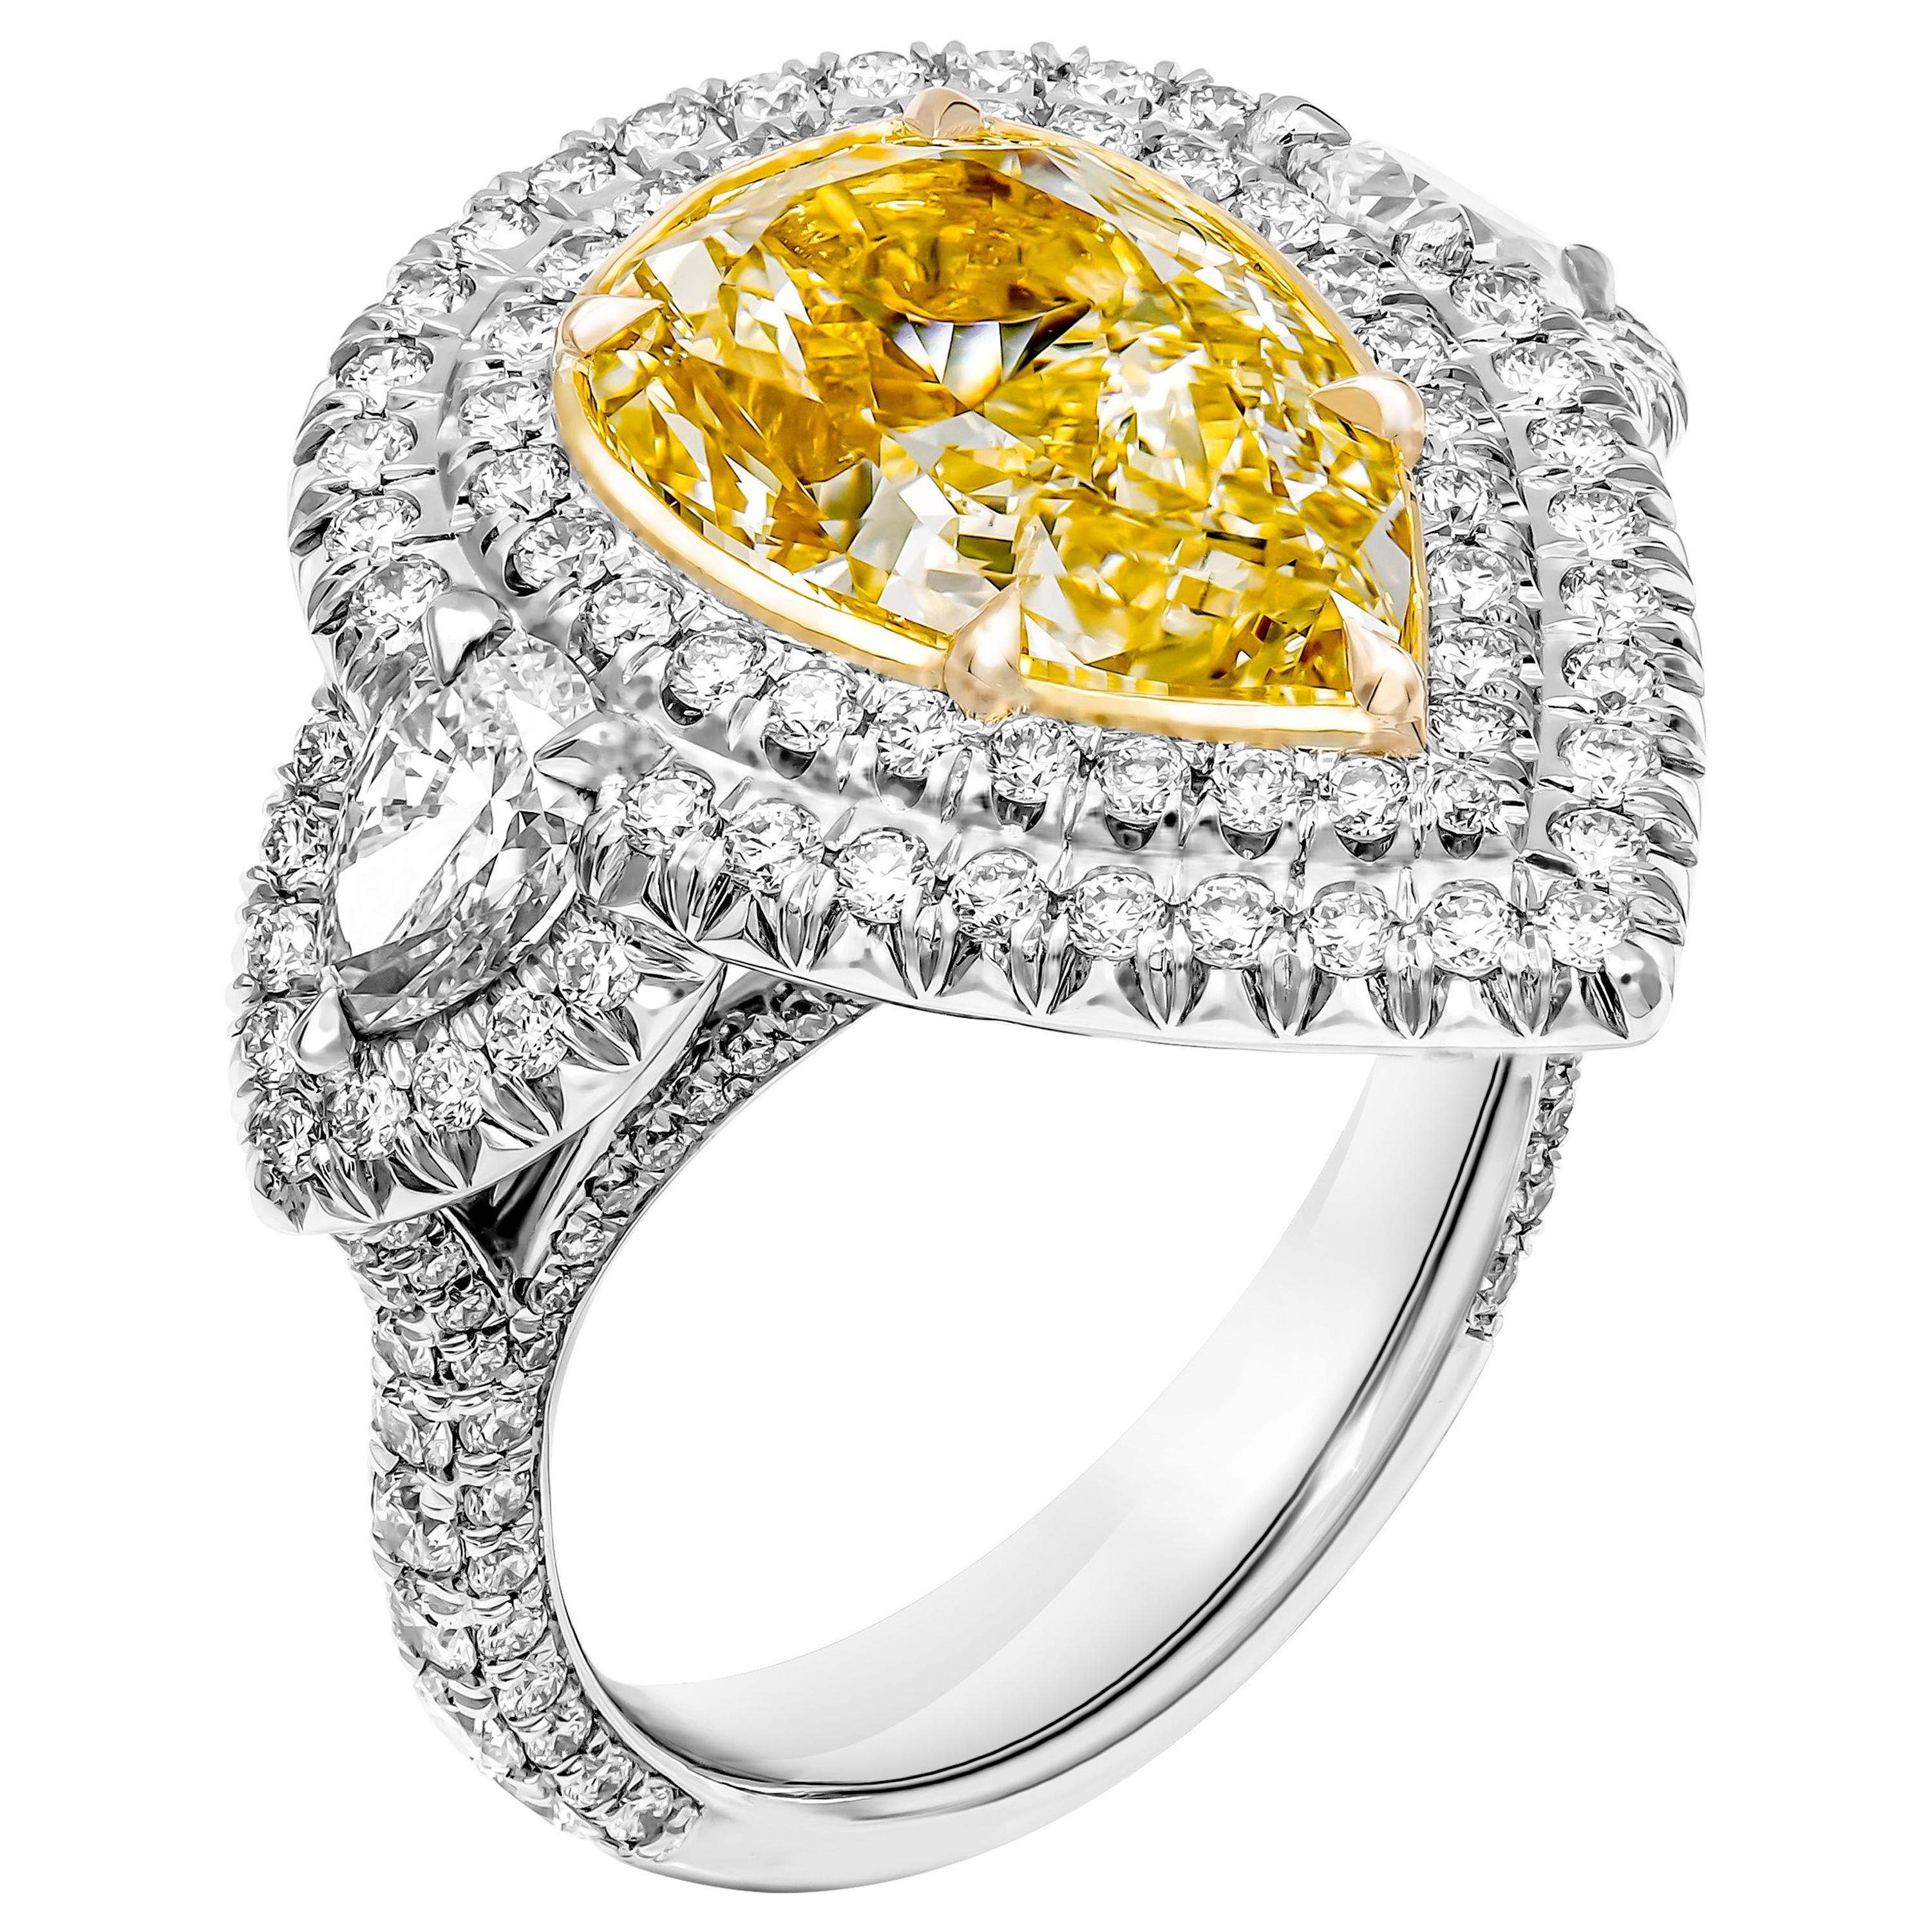 GIA Certified 3-Stone Ring with 5.27 Carat Fancy Light Yellow VS2 Pear Shape For Sale